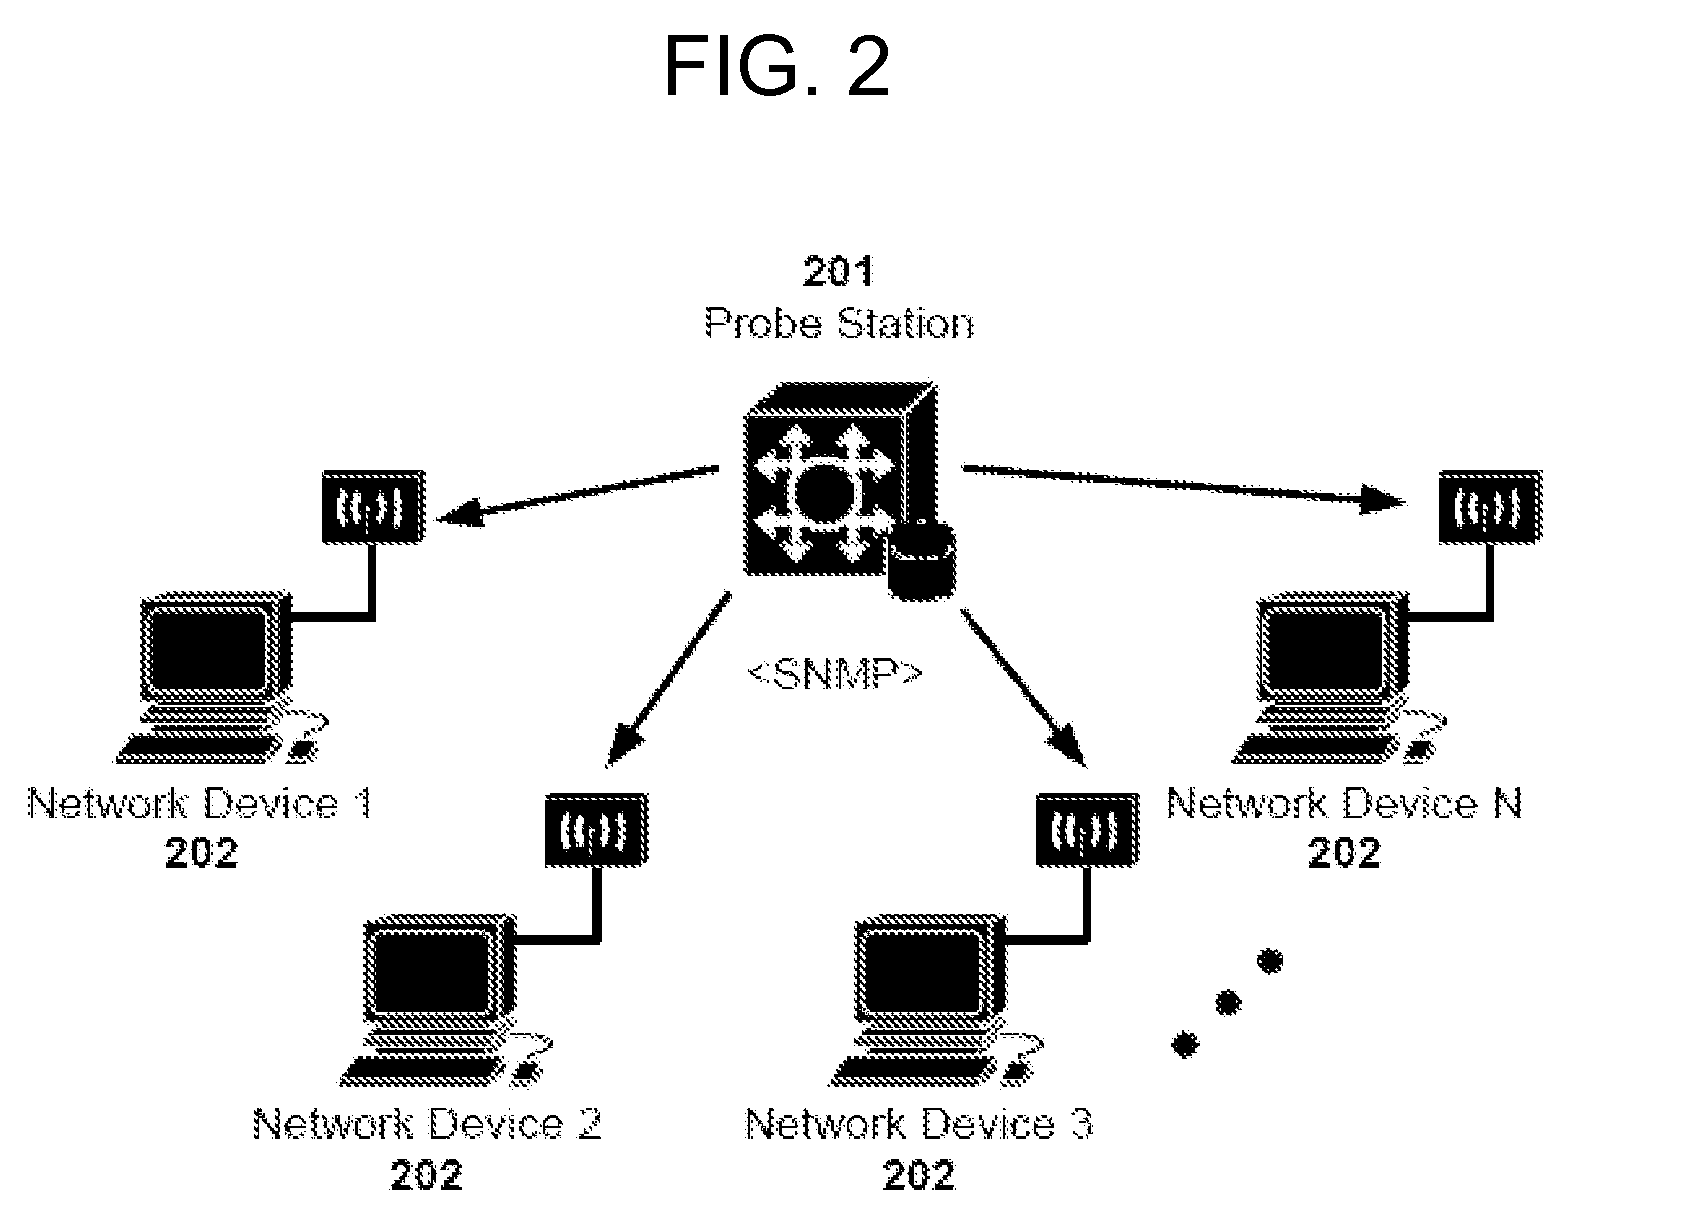 Design and Methods for a Distributed Database, Distributed Processing Network Management System